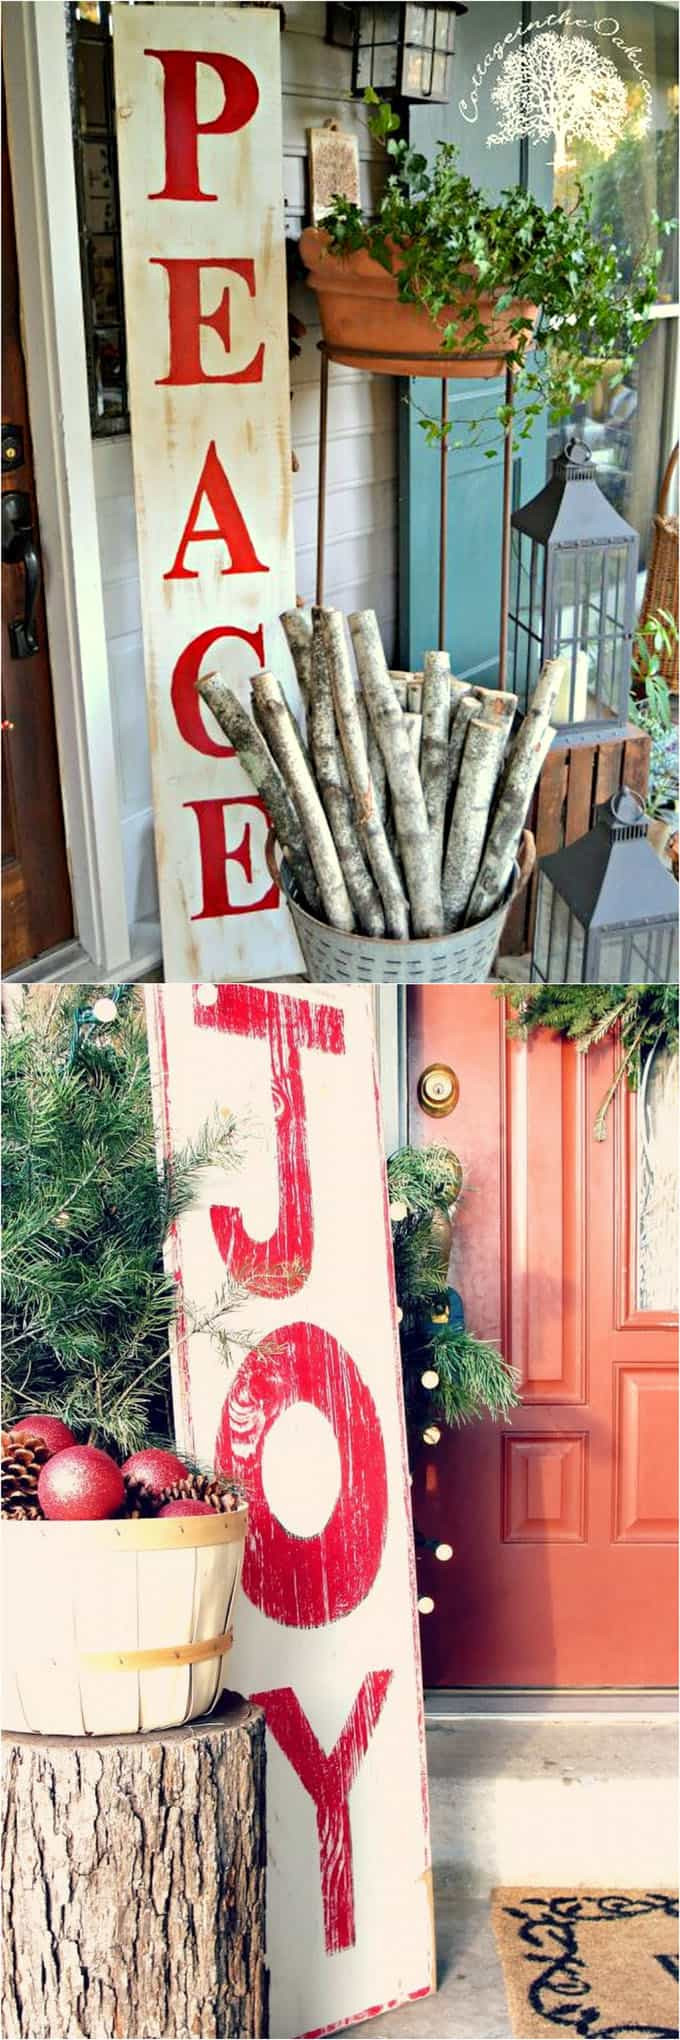 Diy Outdoor Christmas Decorations
 Gorgeous Outdoor Christmas Decorations 32 Best Ideas